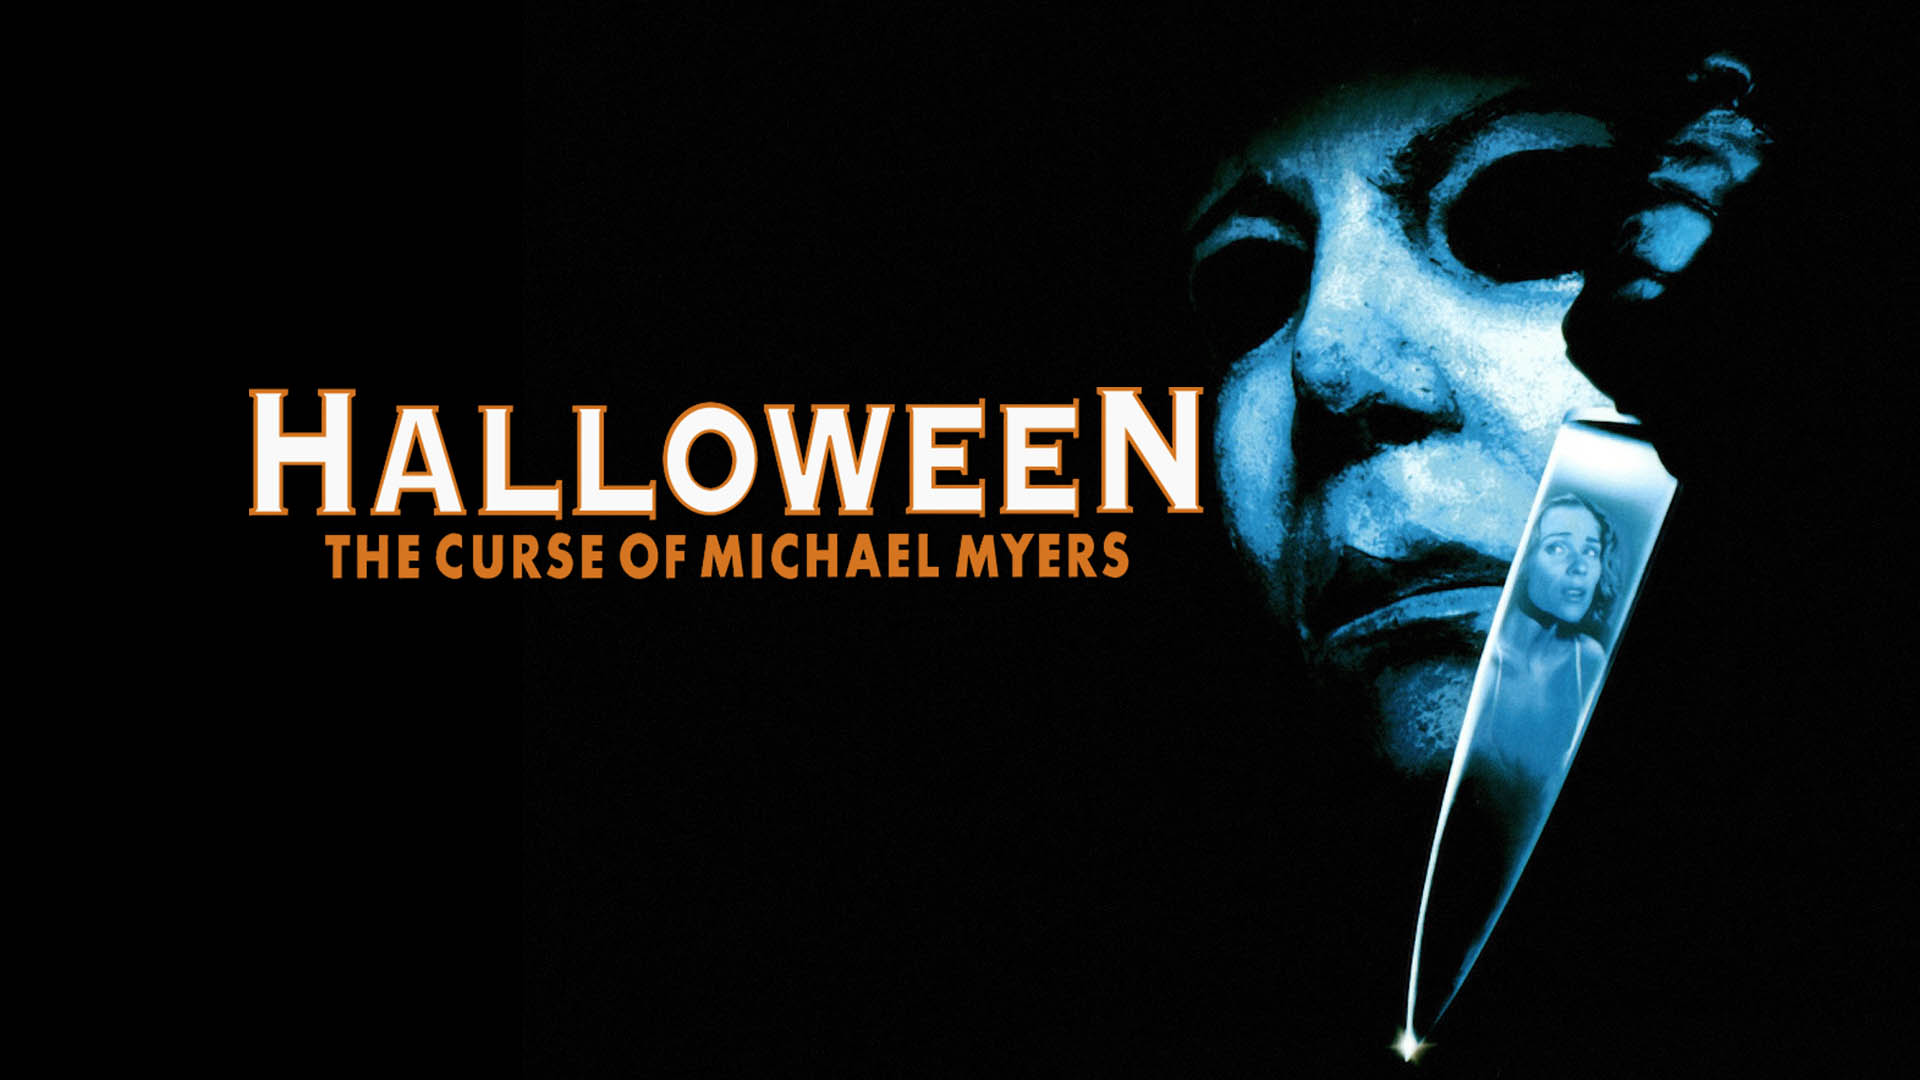 Halloween 6: The Curse of Michael Myers